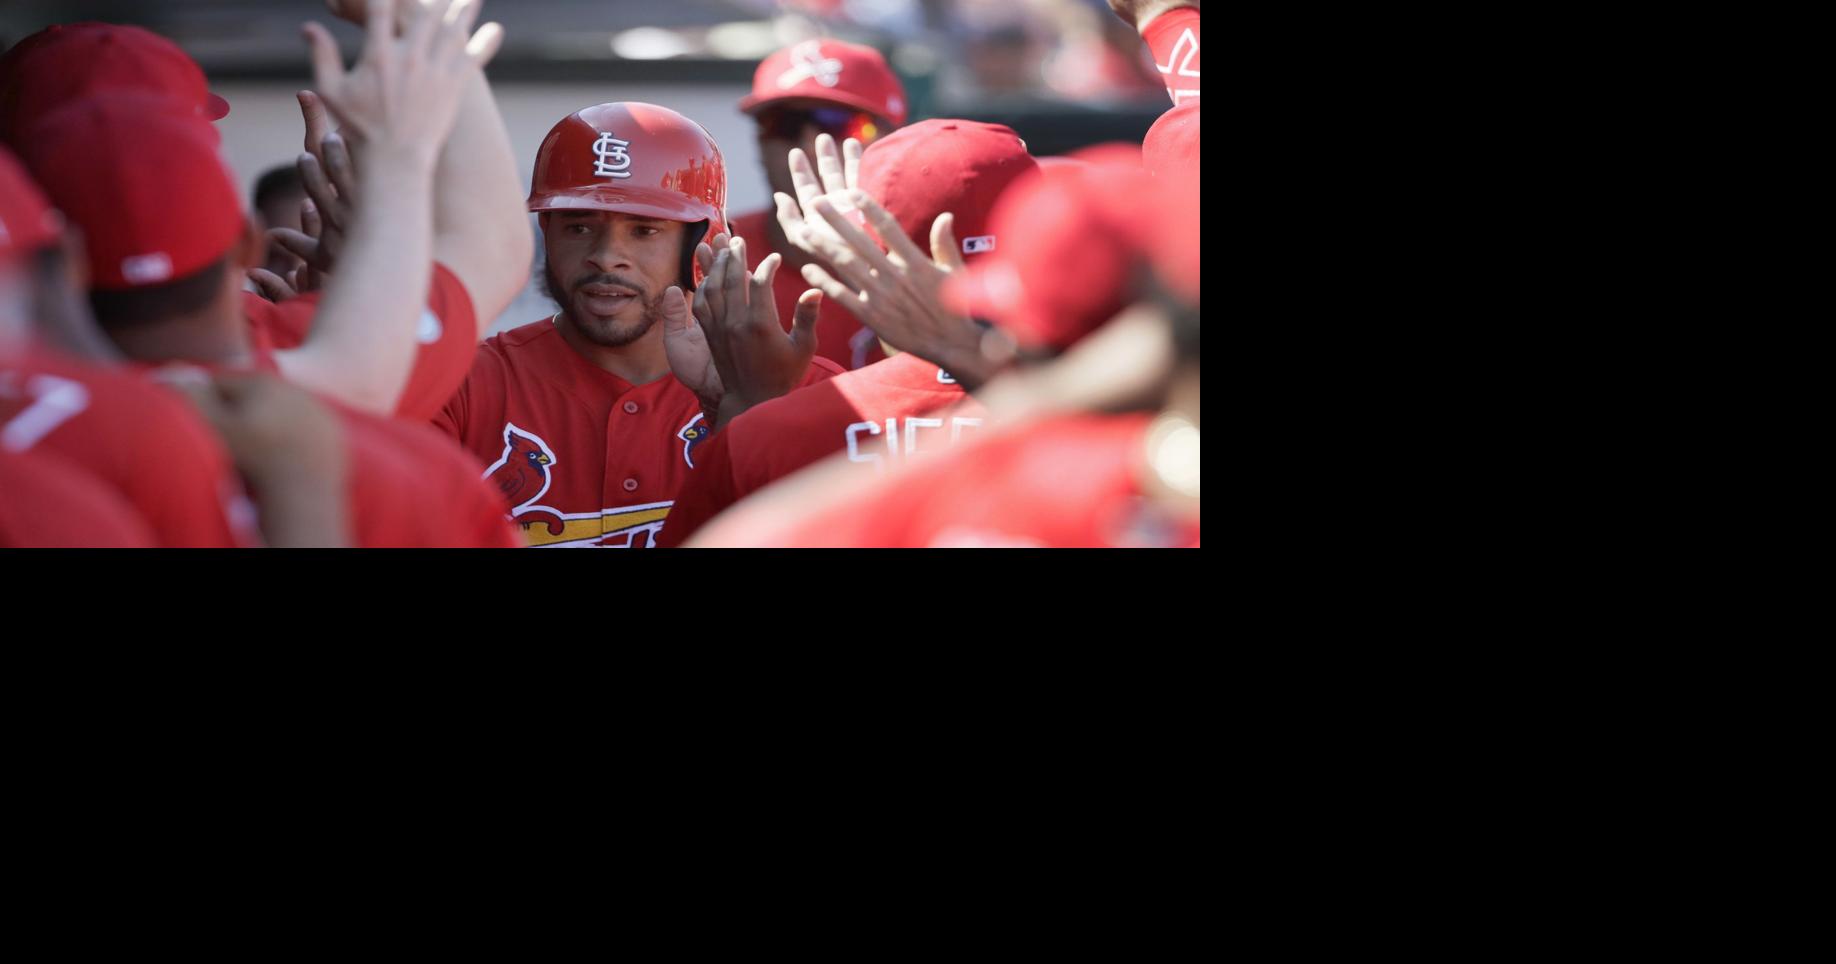 Tommy Pham a fixture in St. Louis community